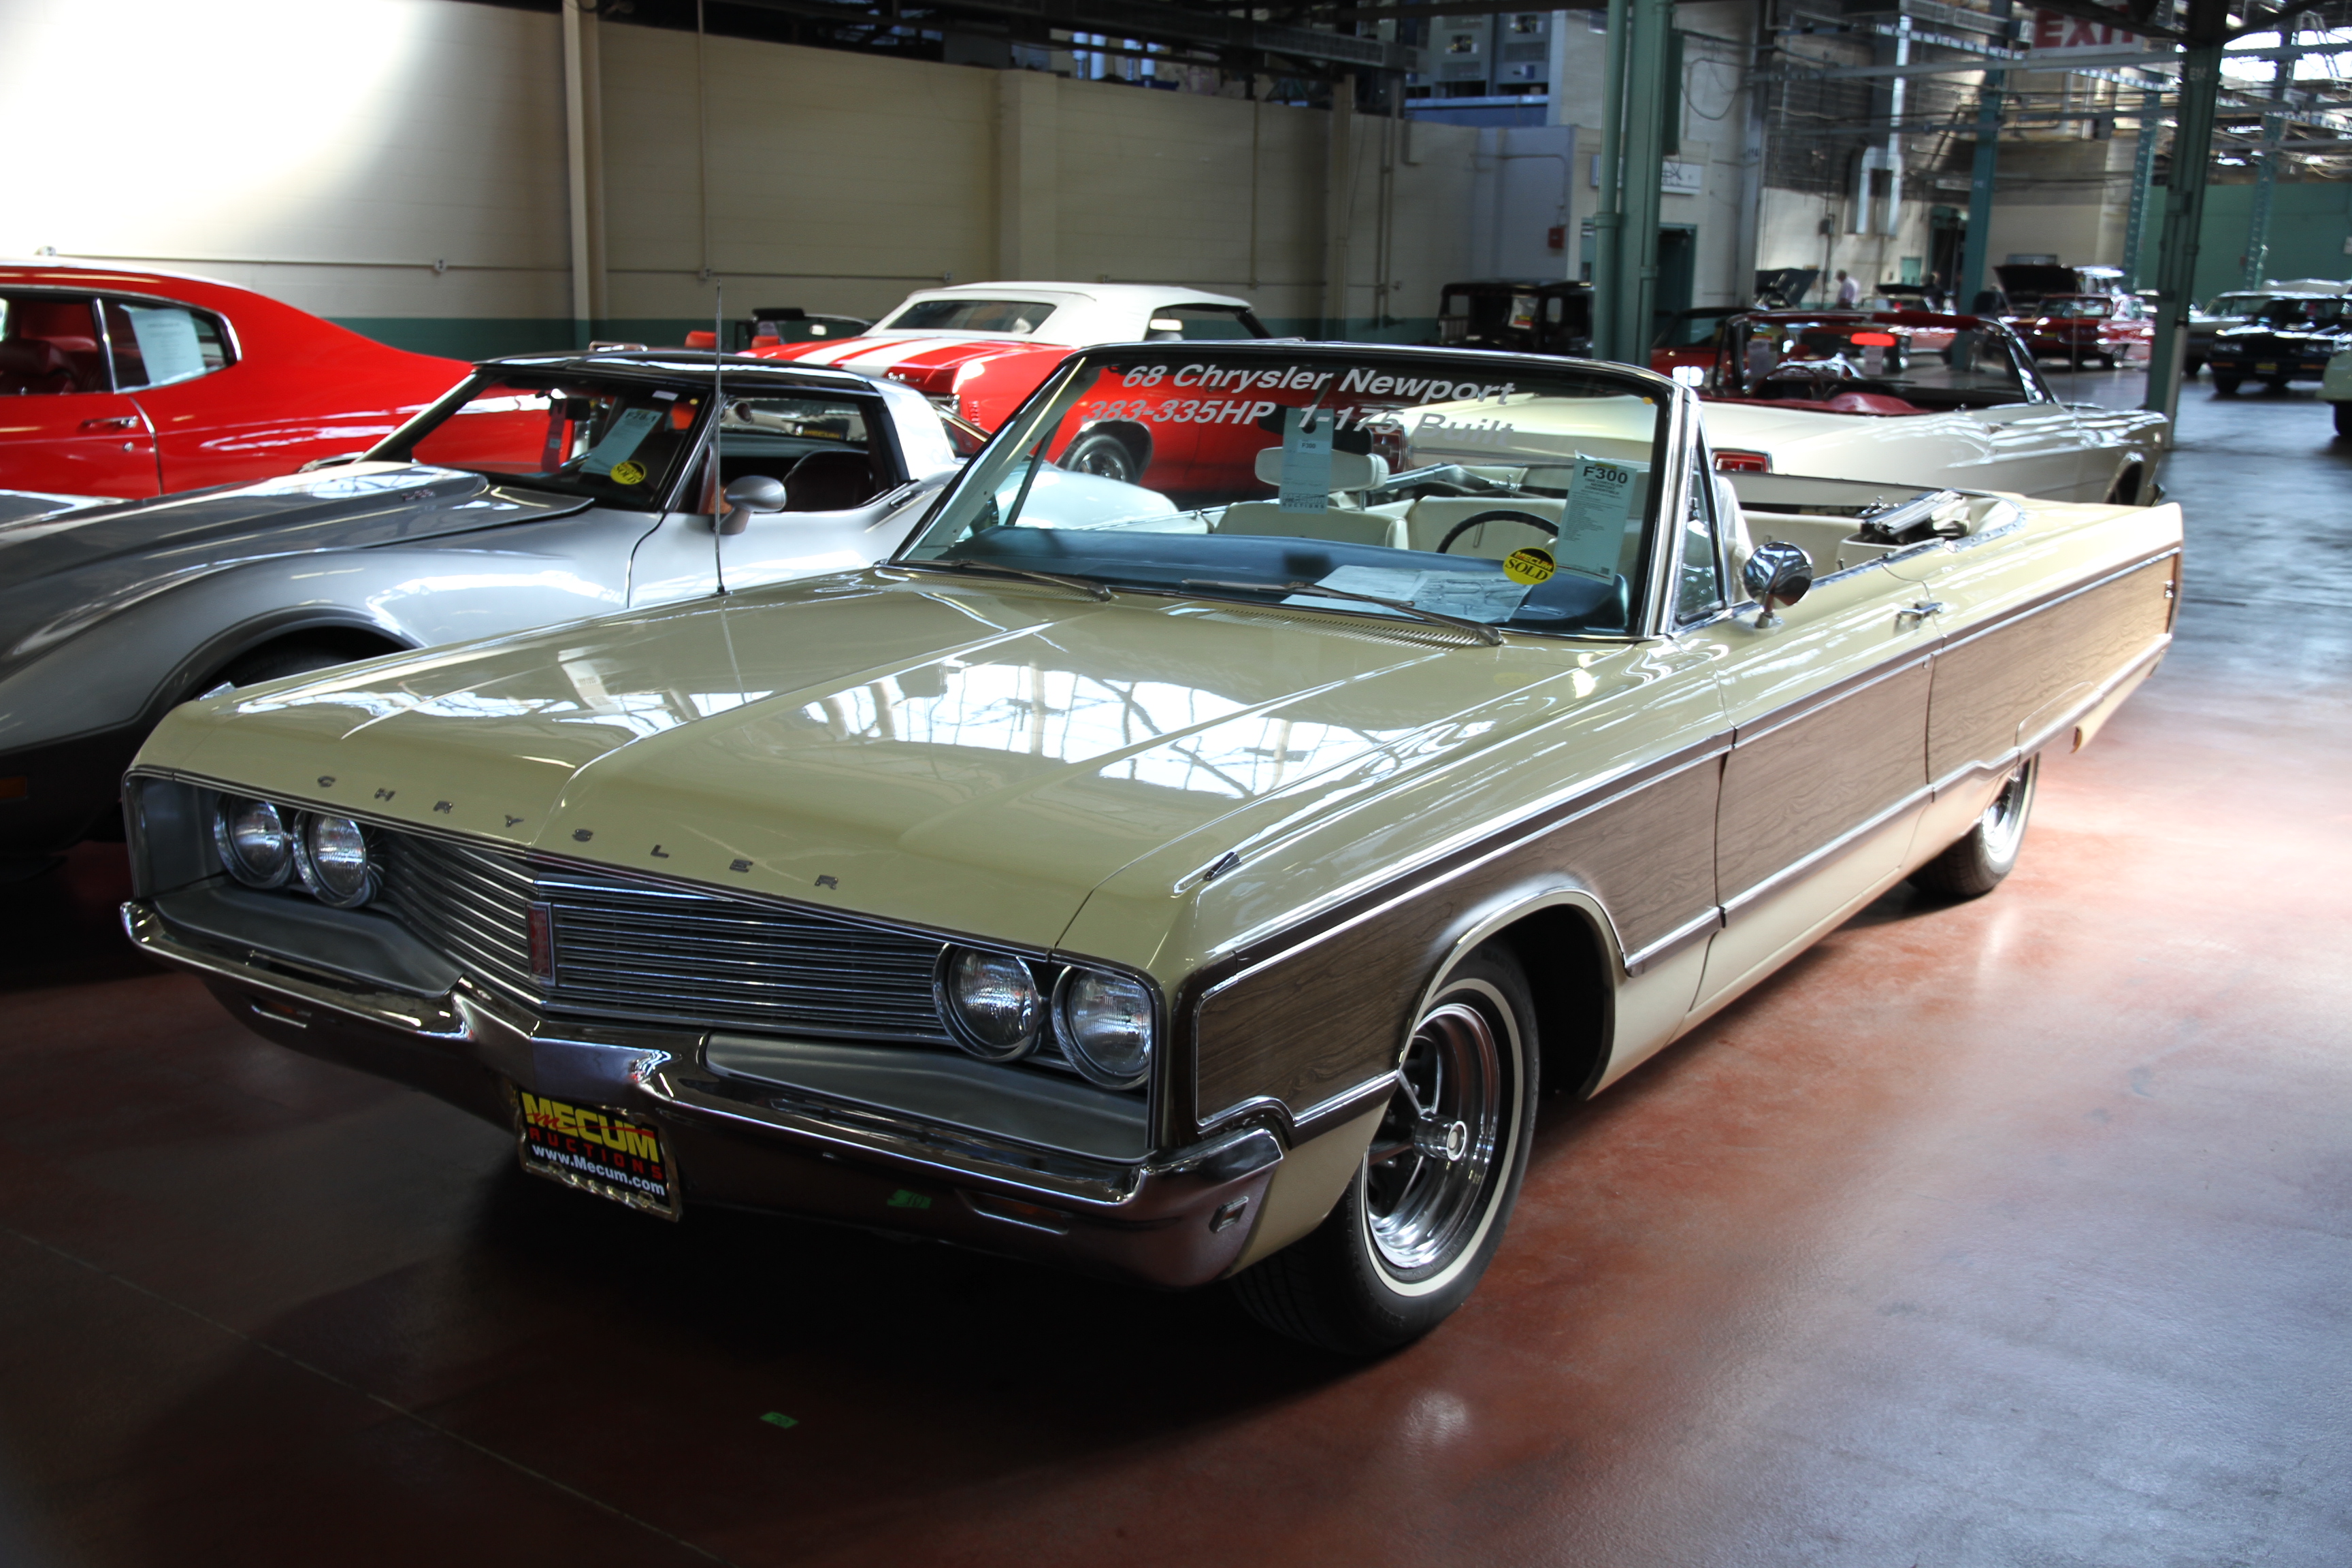 1966 chrysler newport town & country